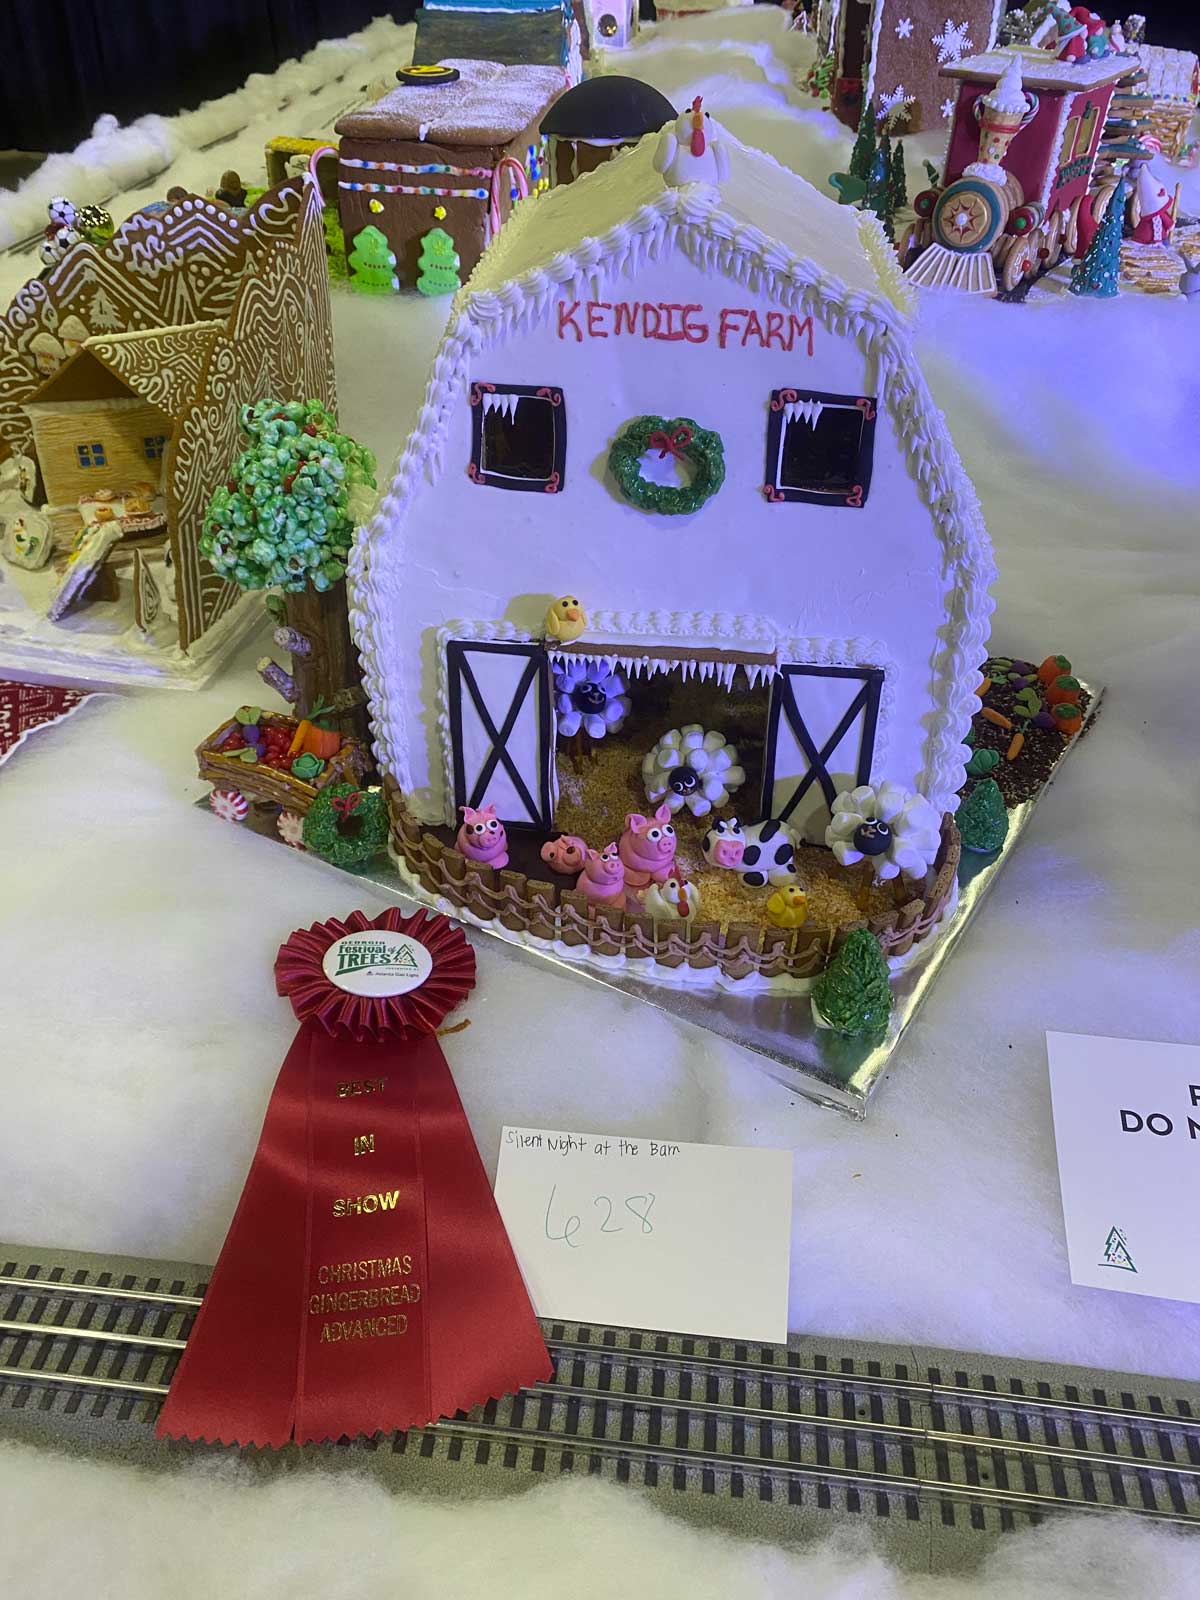 Best In Show - Gingerbread<br>“Silent Night at the Barn” by Kathleen McDaniel